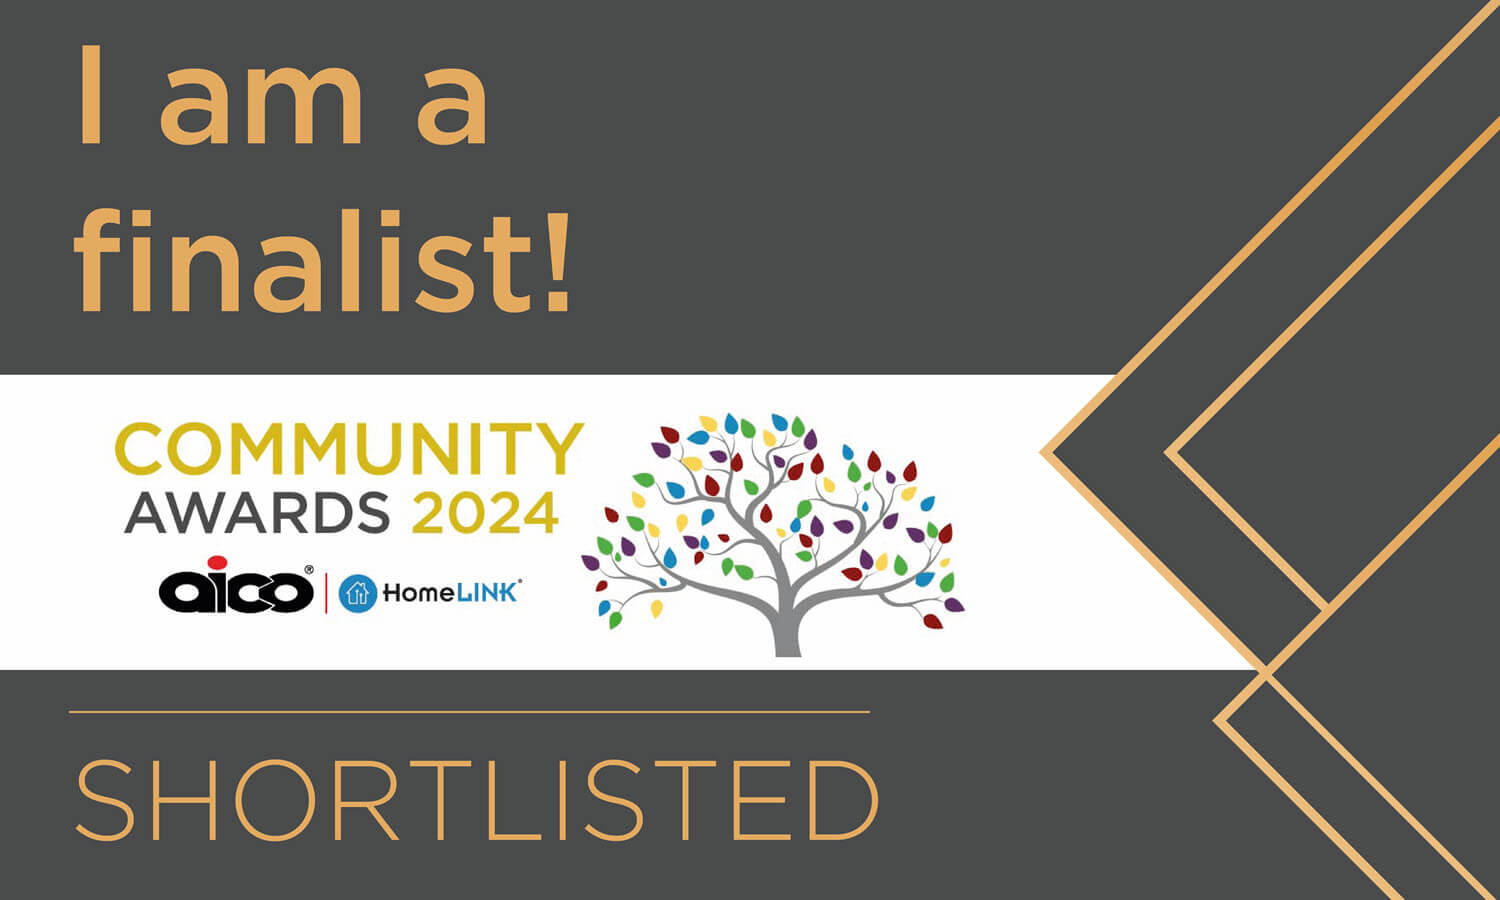 We were delighted to be finalists at the aico HomeLINK community awards 2024.